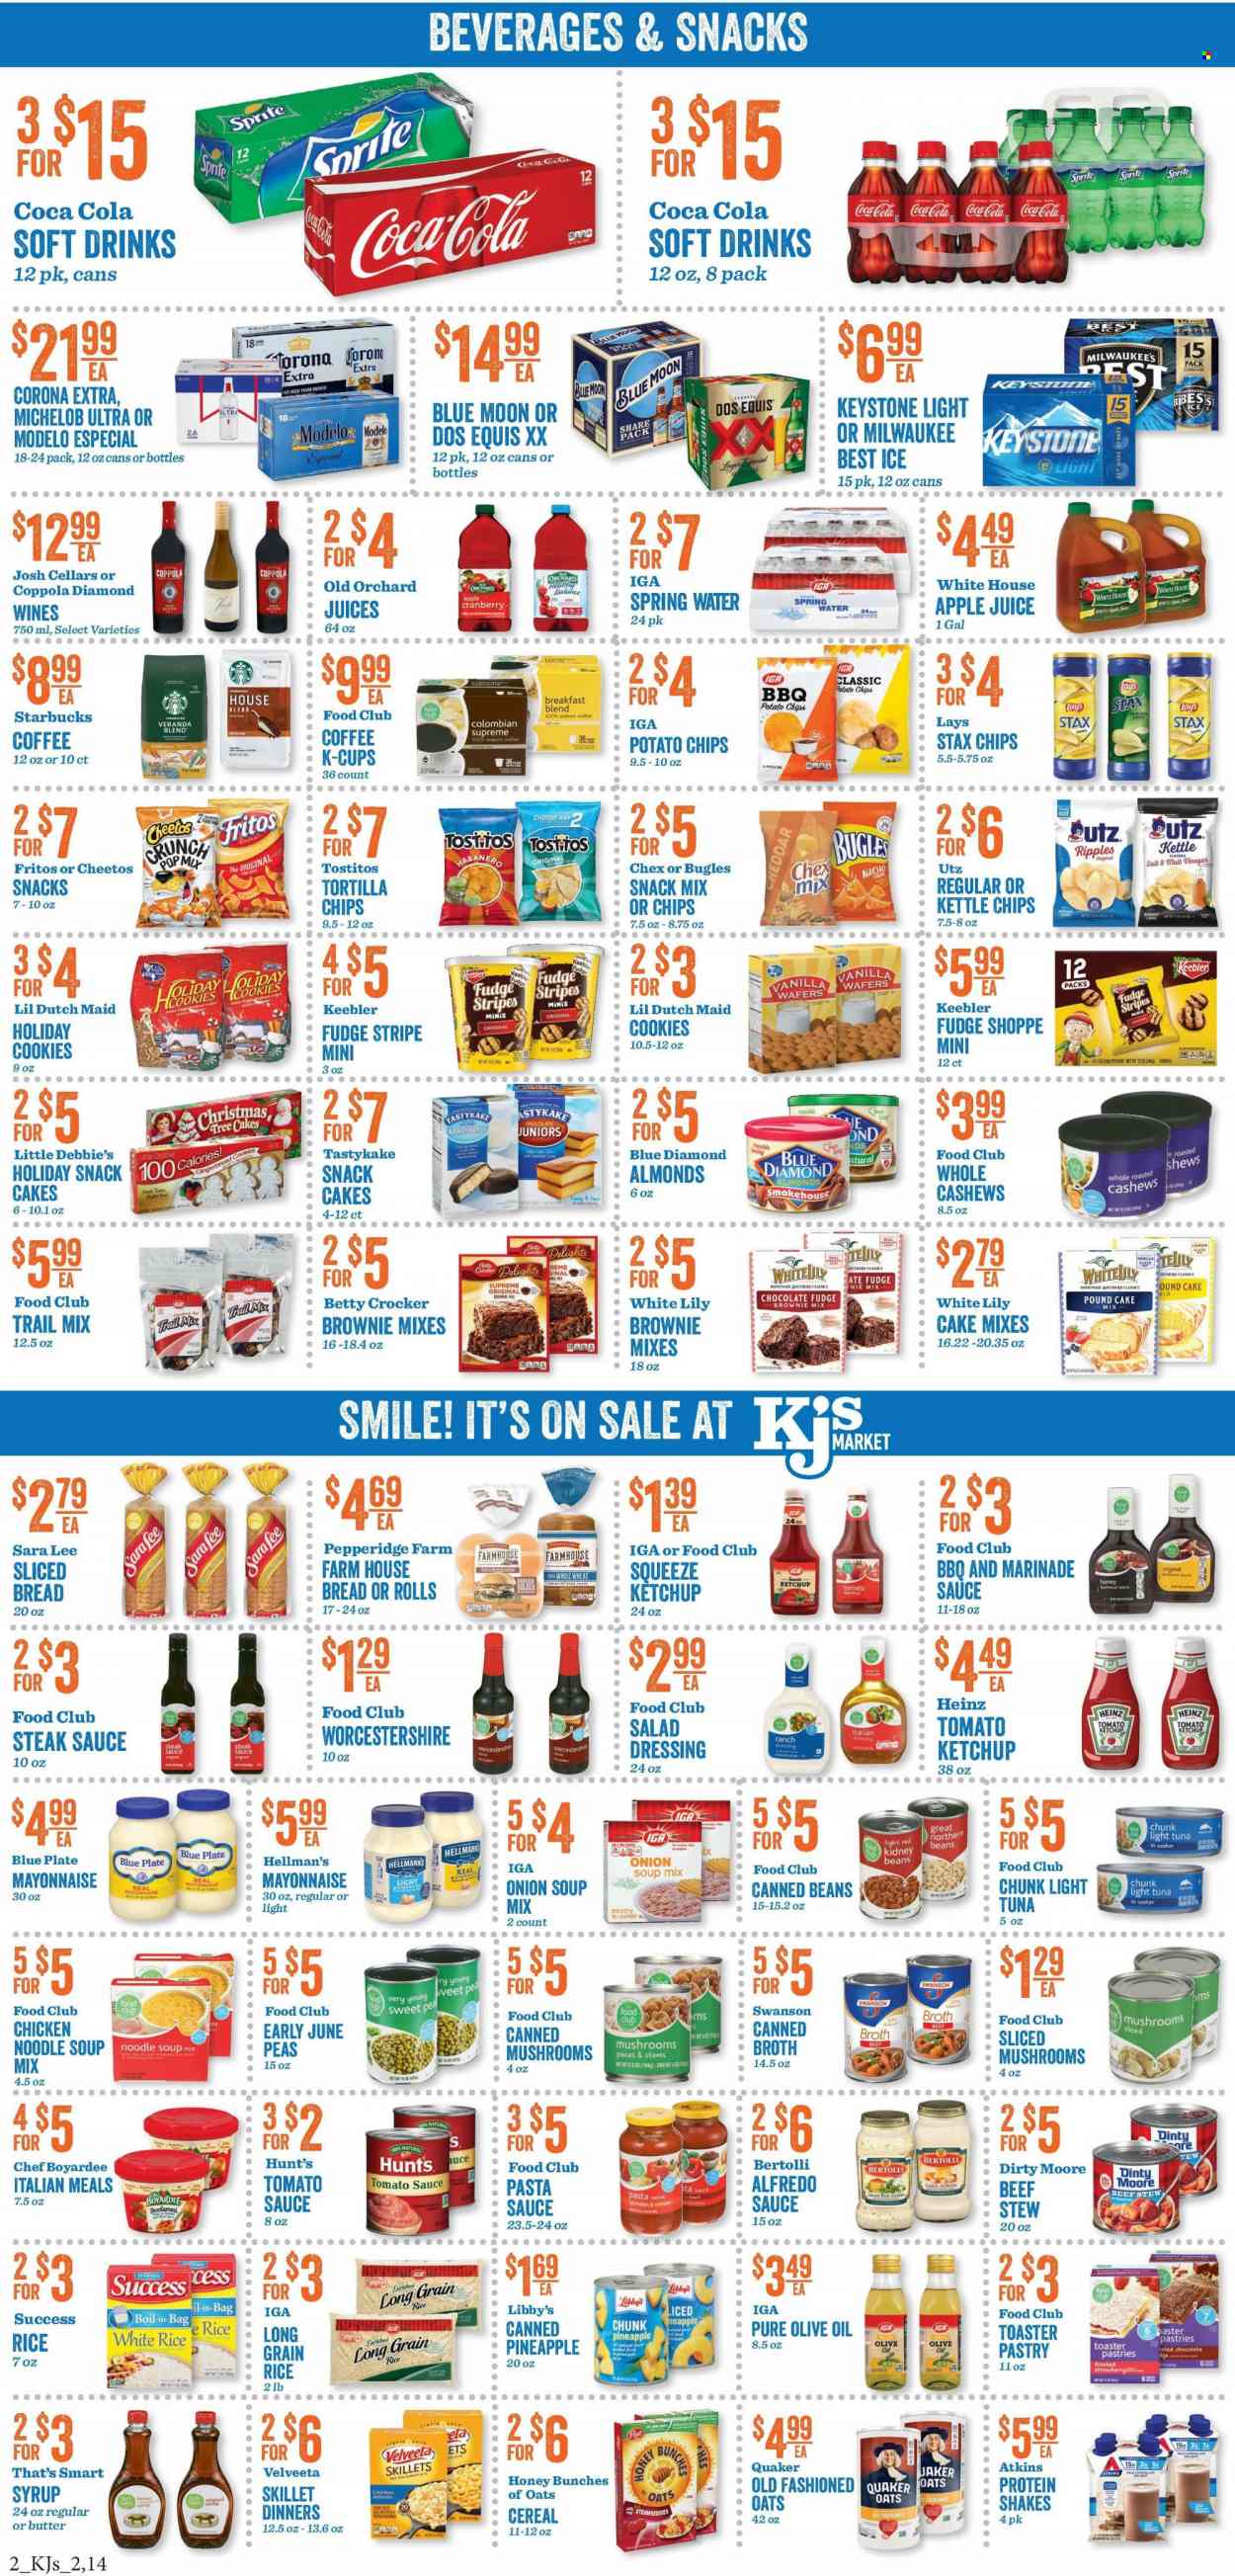 thumbnail - KJ´s Market Flyer - 11/30/2022 - 12/06/2022 - Sales products - mushrooms, bread, Sara Lee, gingerbread, brownie mix, cake mix, peas, strawberries, tuna, pasta sauce, onion soup, soup mix, soup, sauce, noodles cup, Quaker, noodles, Alfredo sauce, Bertolli, protein drink, shake, butter, mayonnaise, ranch dressing, italian dressing, Hellmann’s, cookies, fudge, gingerbread cookies, chocolate, snack, Keebler, Fritos, tortilla chips, potato chips, Cheetos, chips, Lay’s, Tostitos, Chex Mix, broth, tomato sauce, tuna in water, Heinz, kidney beans, light tuna, Chef Boyardee, canned mushrooms, cereals, rice, white rice, long grain rice, BBQ sauce, salad dressing, steak sauce, worcestershire sauce, ketchup, dressing, marinade, olive oil, oil, syrup, cashews, Blue Diamond, trail mix, apple juice, Coca-Cola, Sprite, juice, soft drink, spring water, coffee, Starbucks, coffee capsules, K-Cups, breakfast blend, beer, Corona Extra, Lager, Keystone, Modelo, steak, plate, pan, folder, Milwaukee, Dos Equis, Blue Moon, Michelob. Page 2.